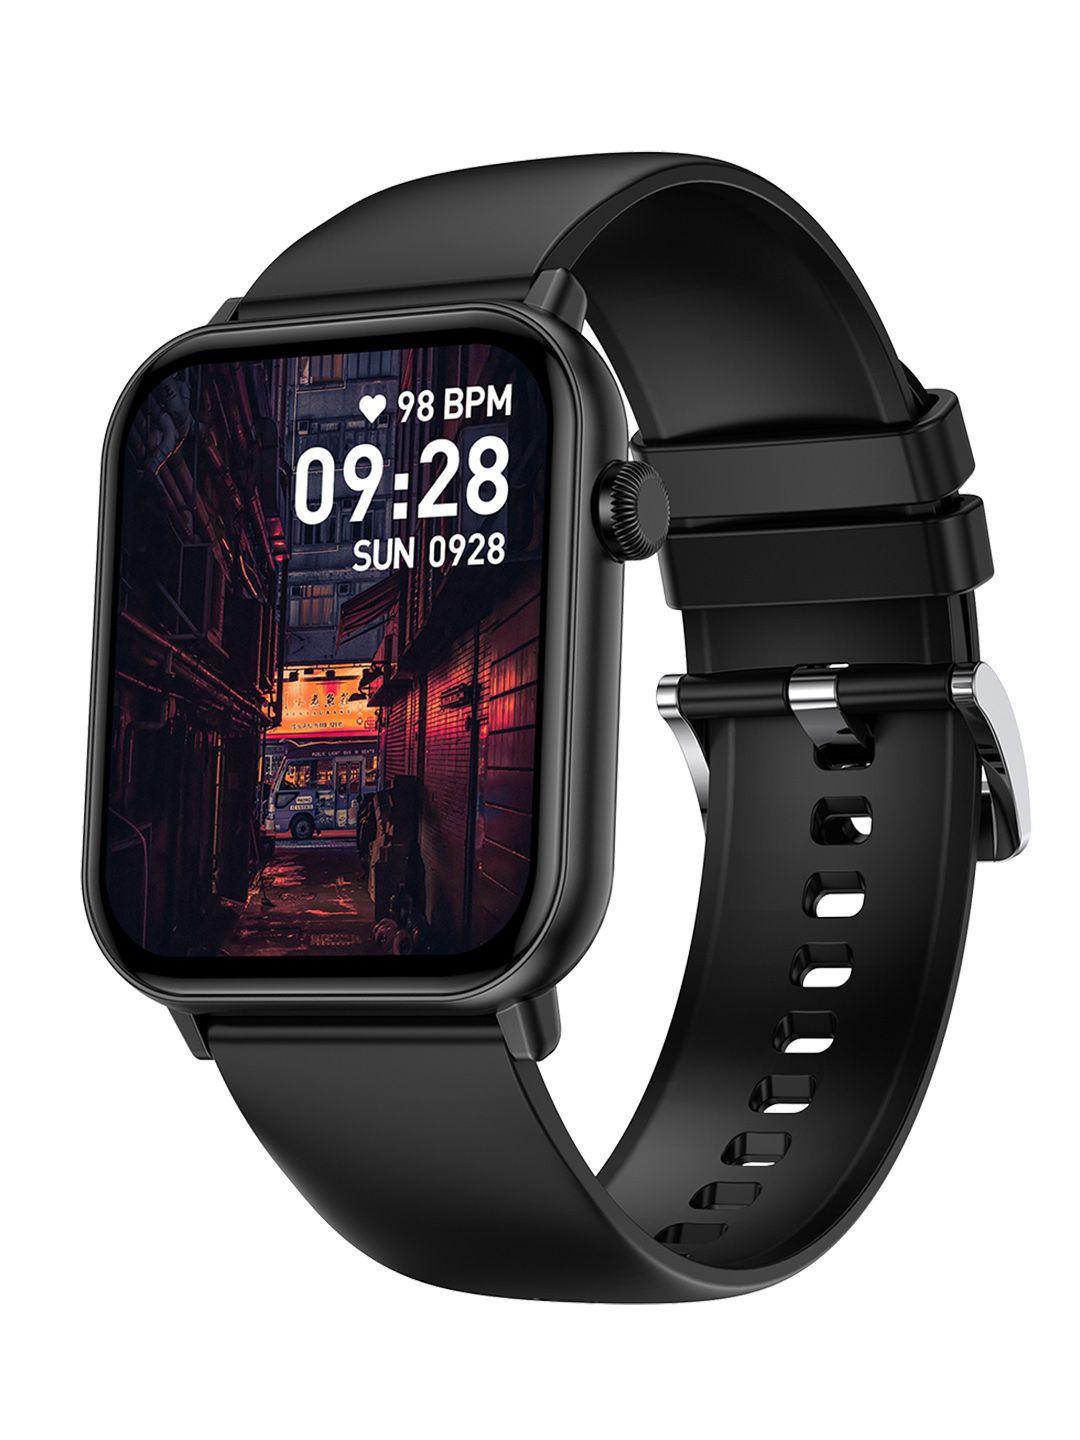 fire-boltt ninja fit smartwatch with full touch display & 120+ sports modes